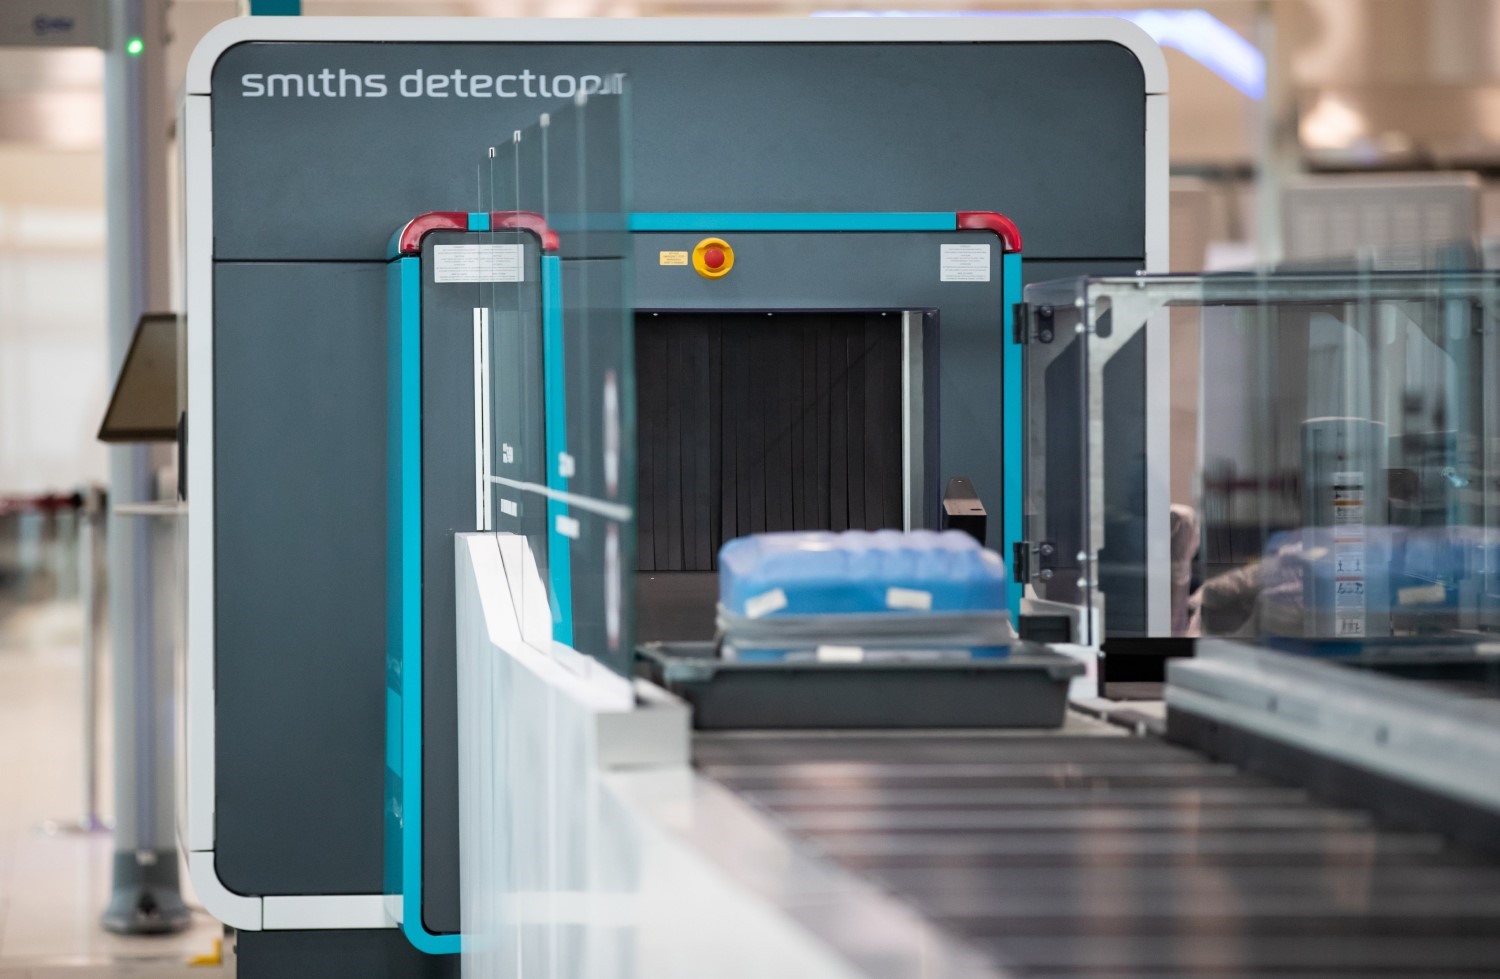 smiths detection device at an airport